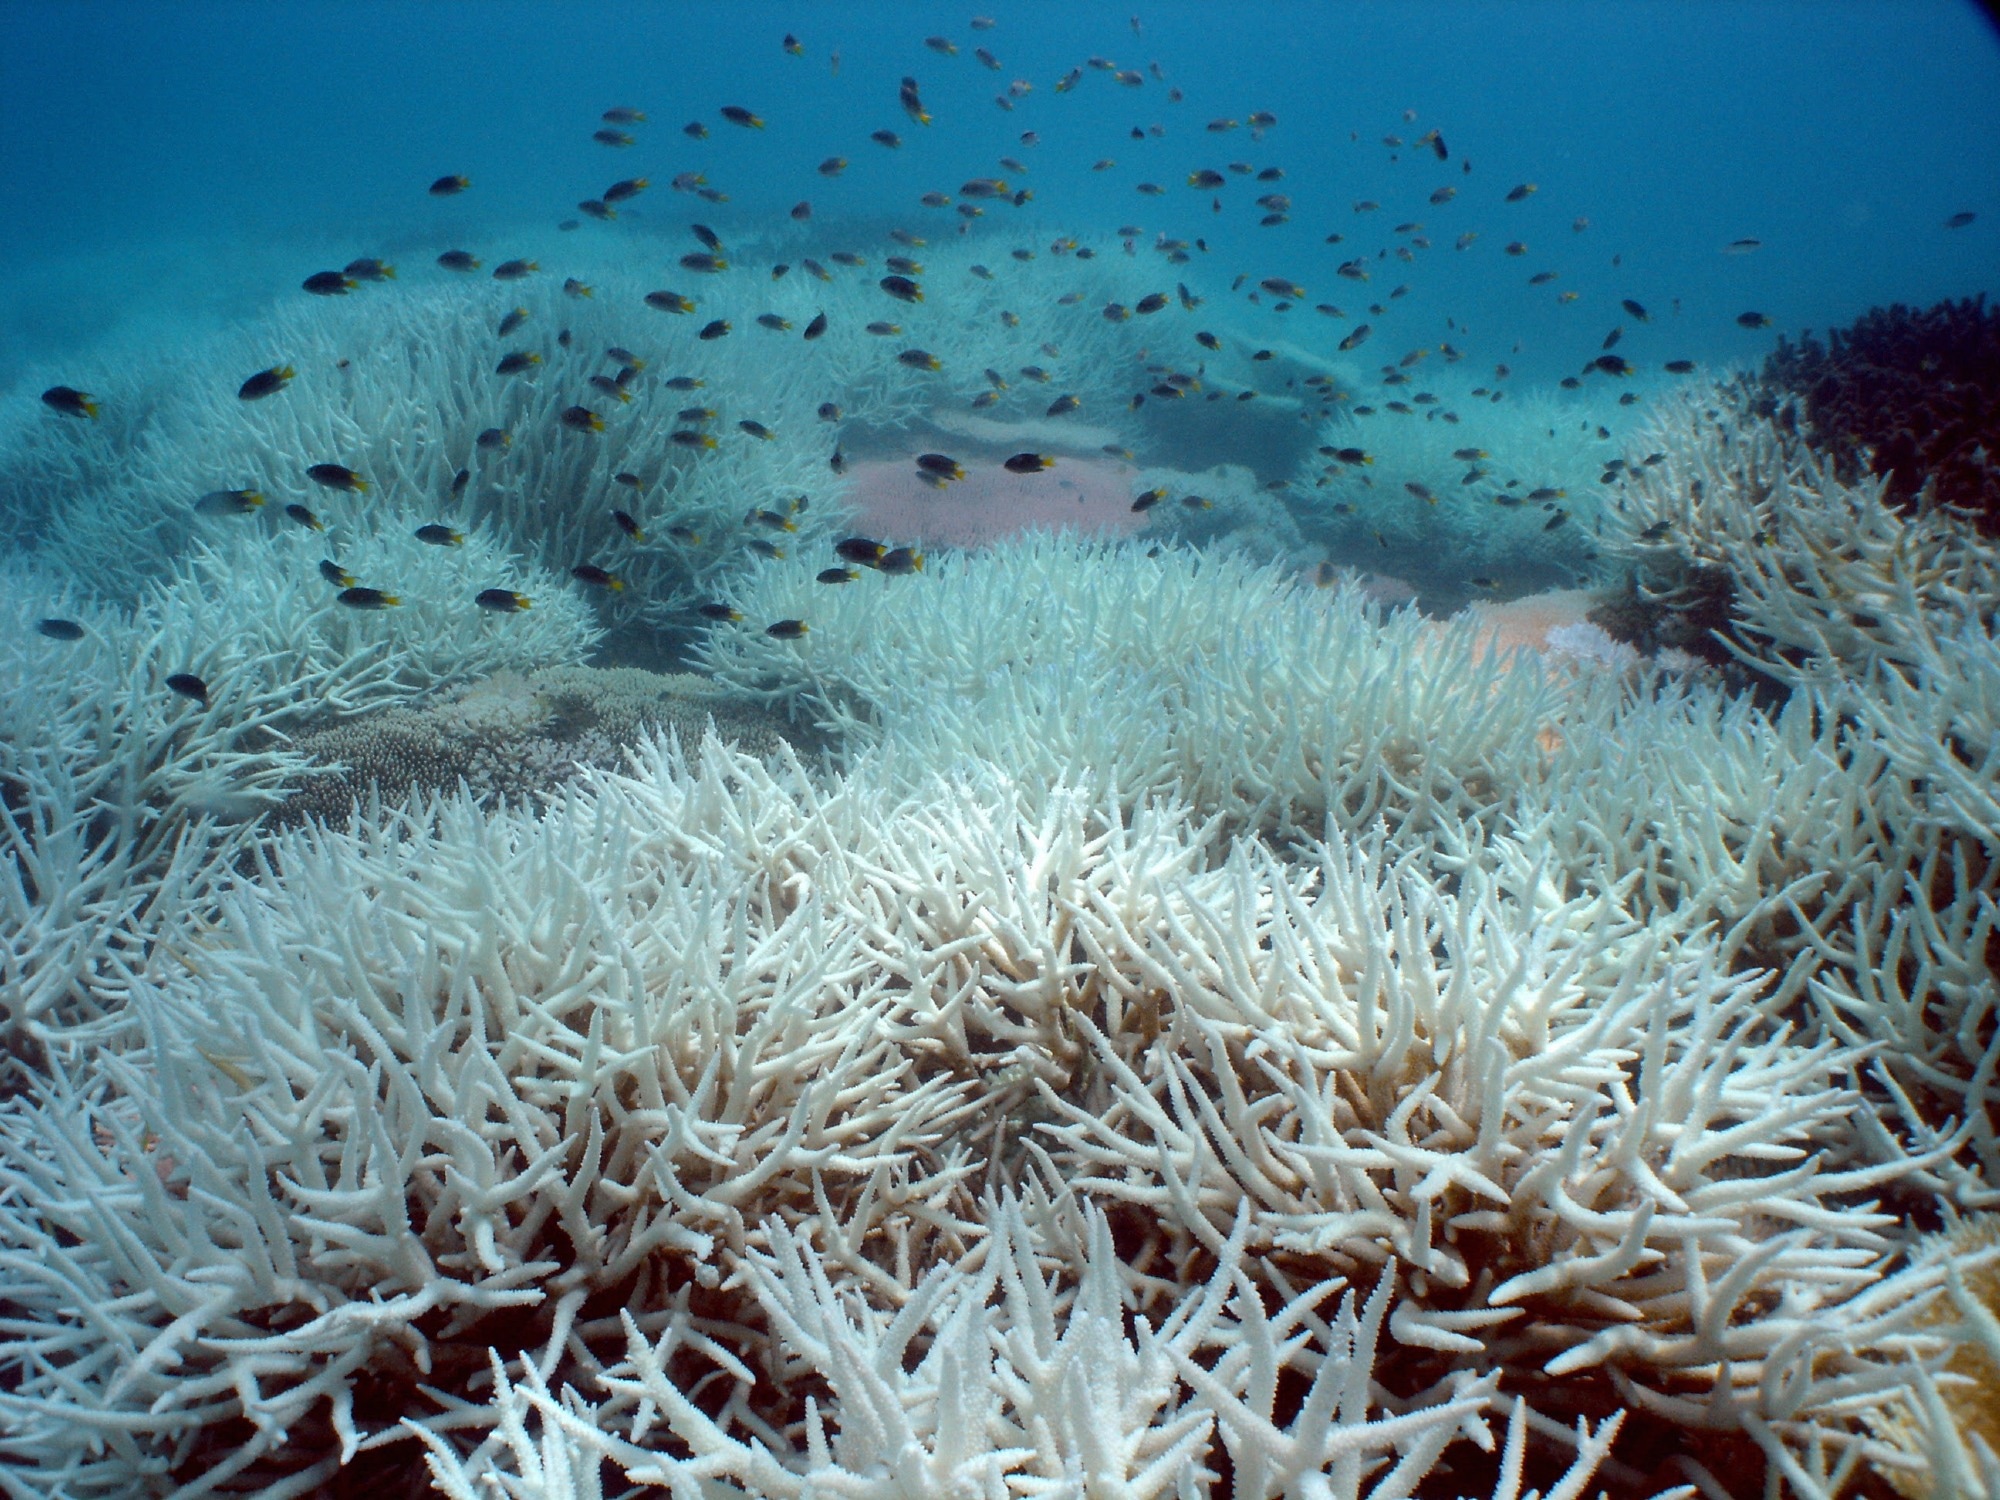 Csiro Study Shows Marine Heatwaves Have Significant Impact on Microorganisms